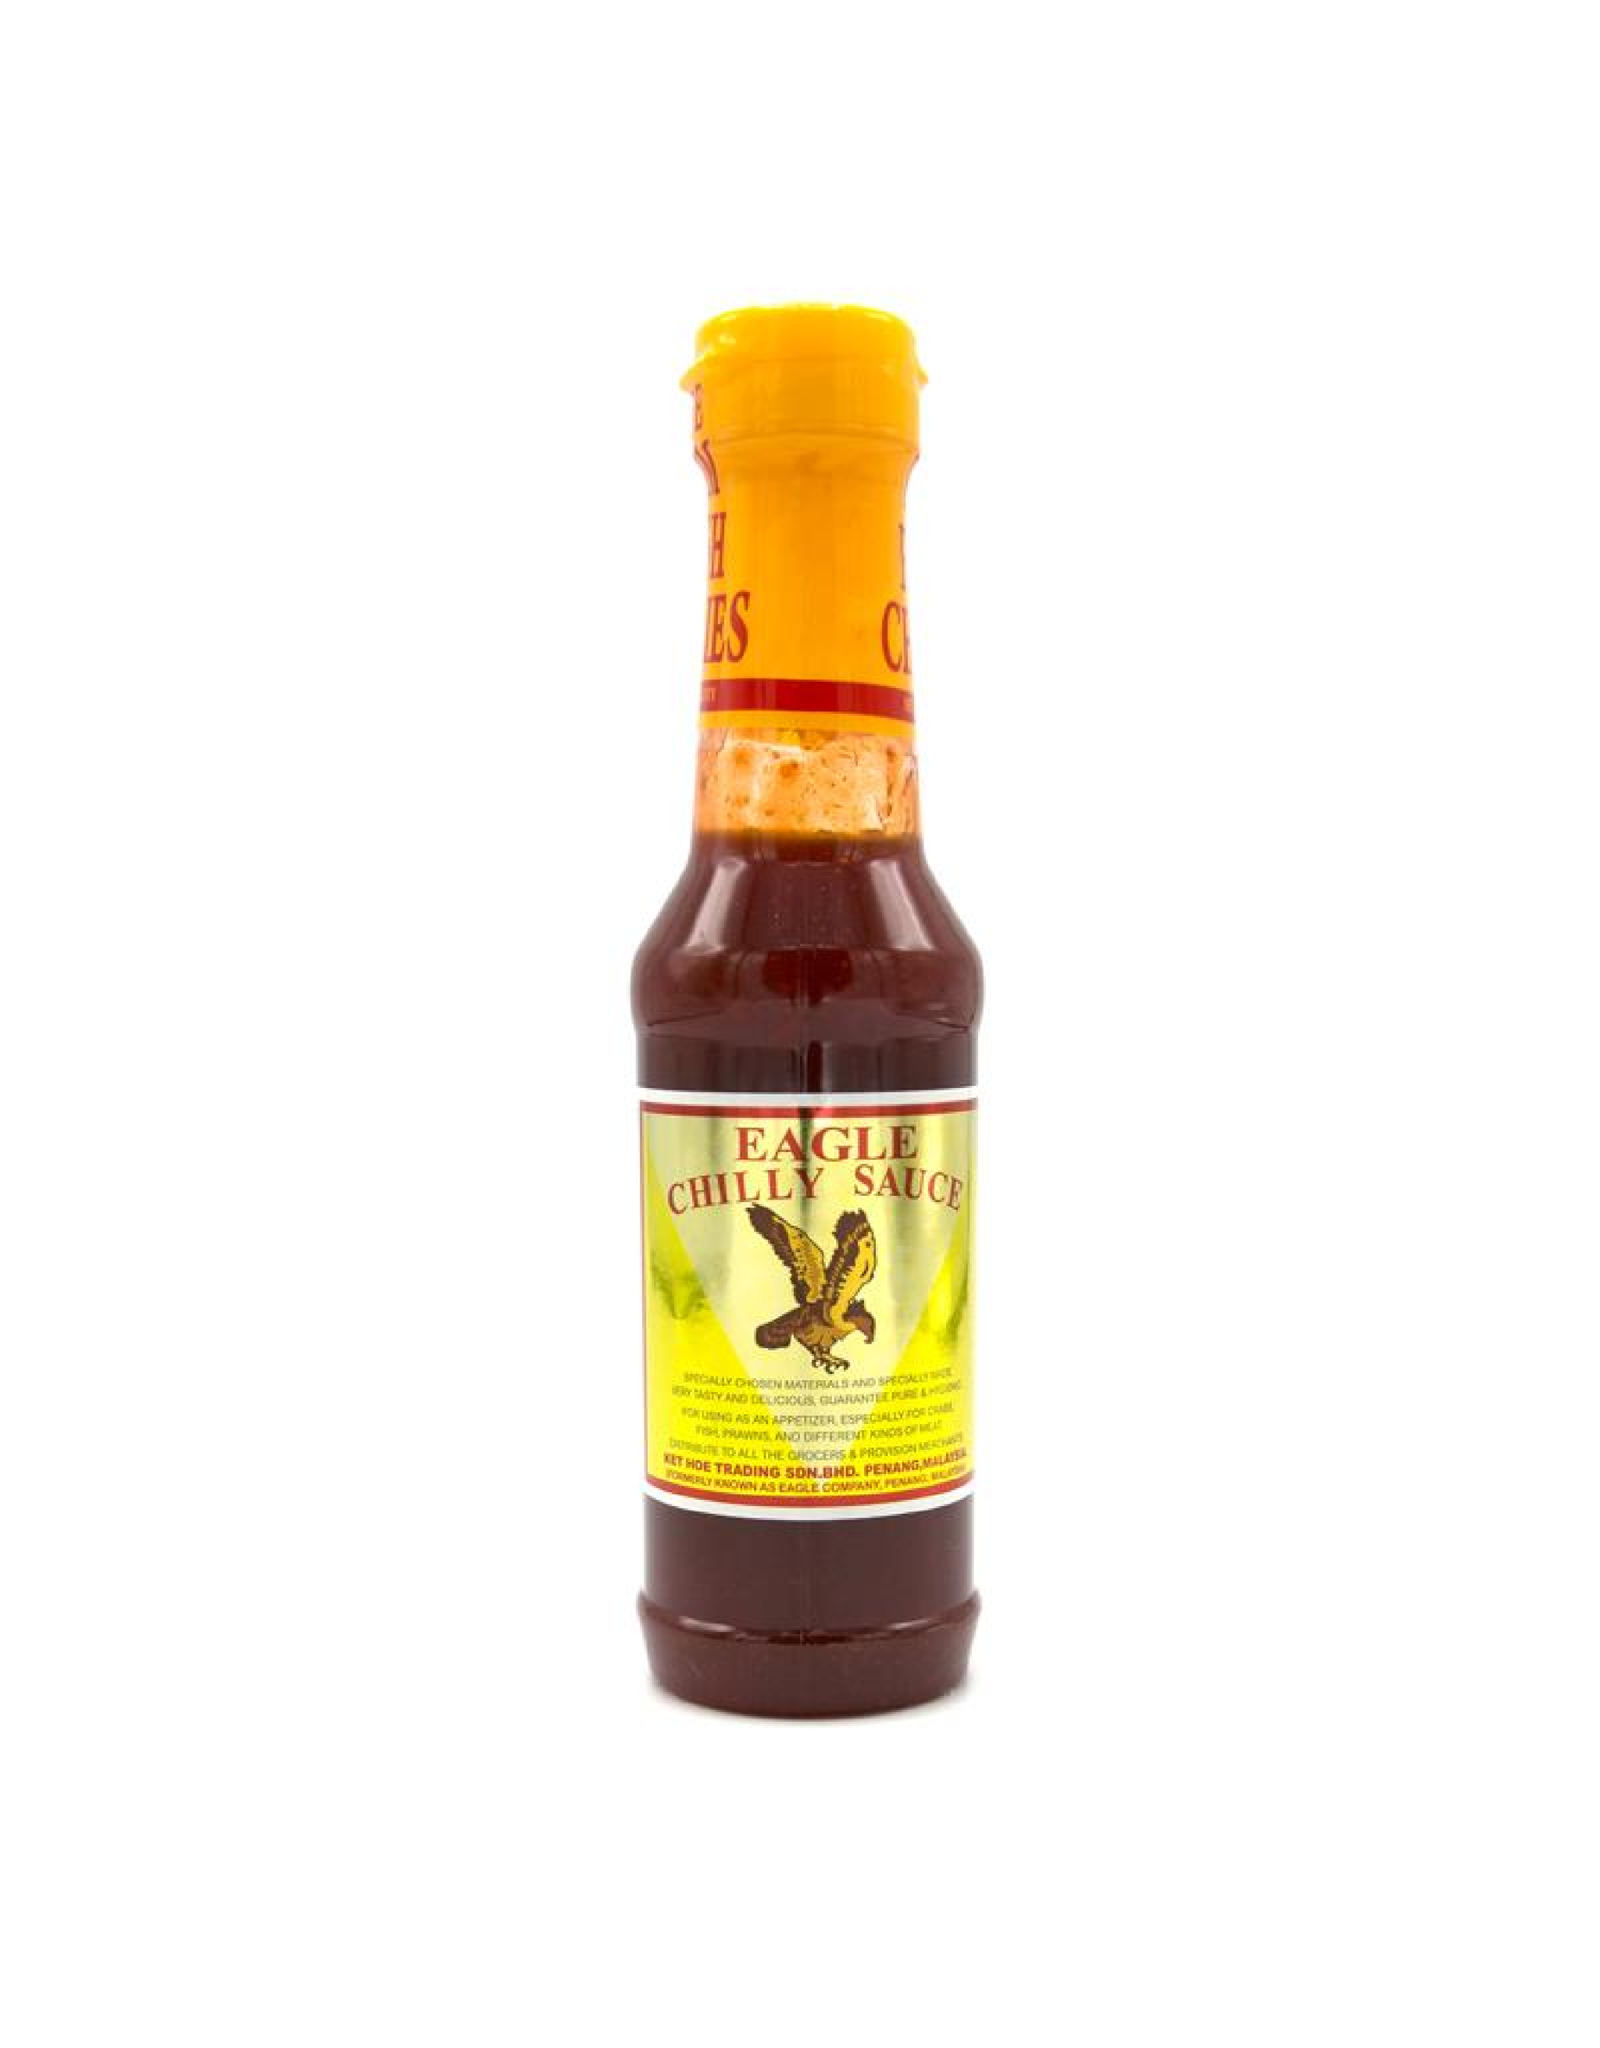 Eagle Chilly Sauce